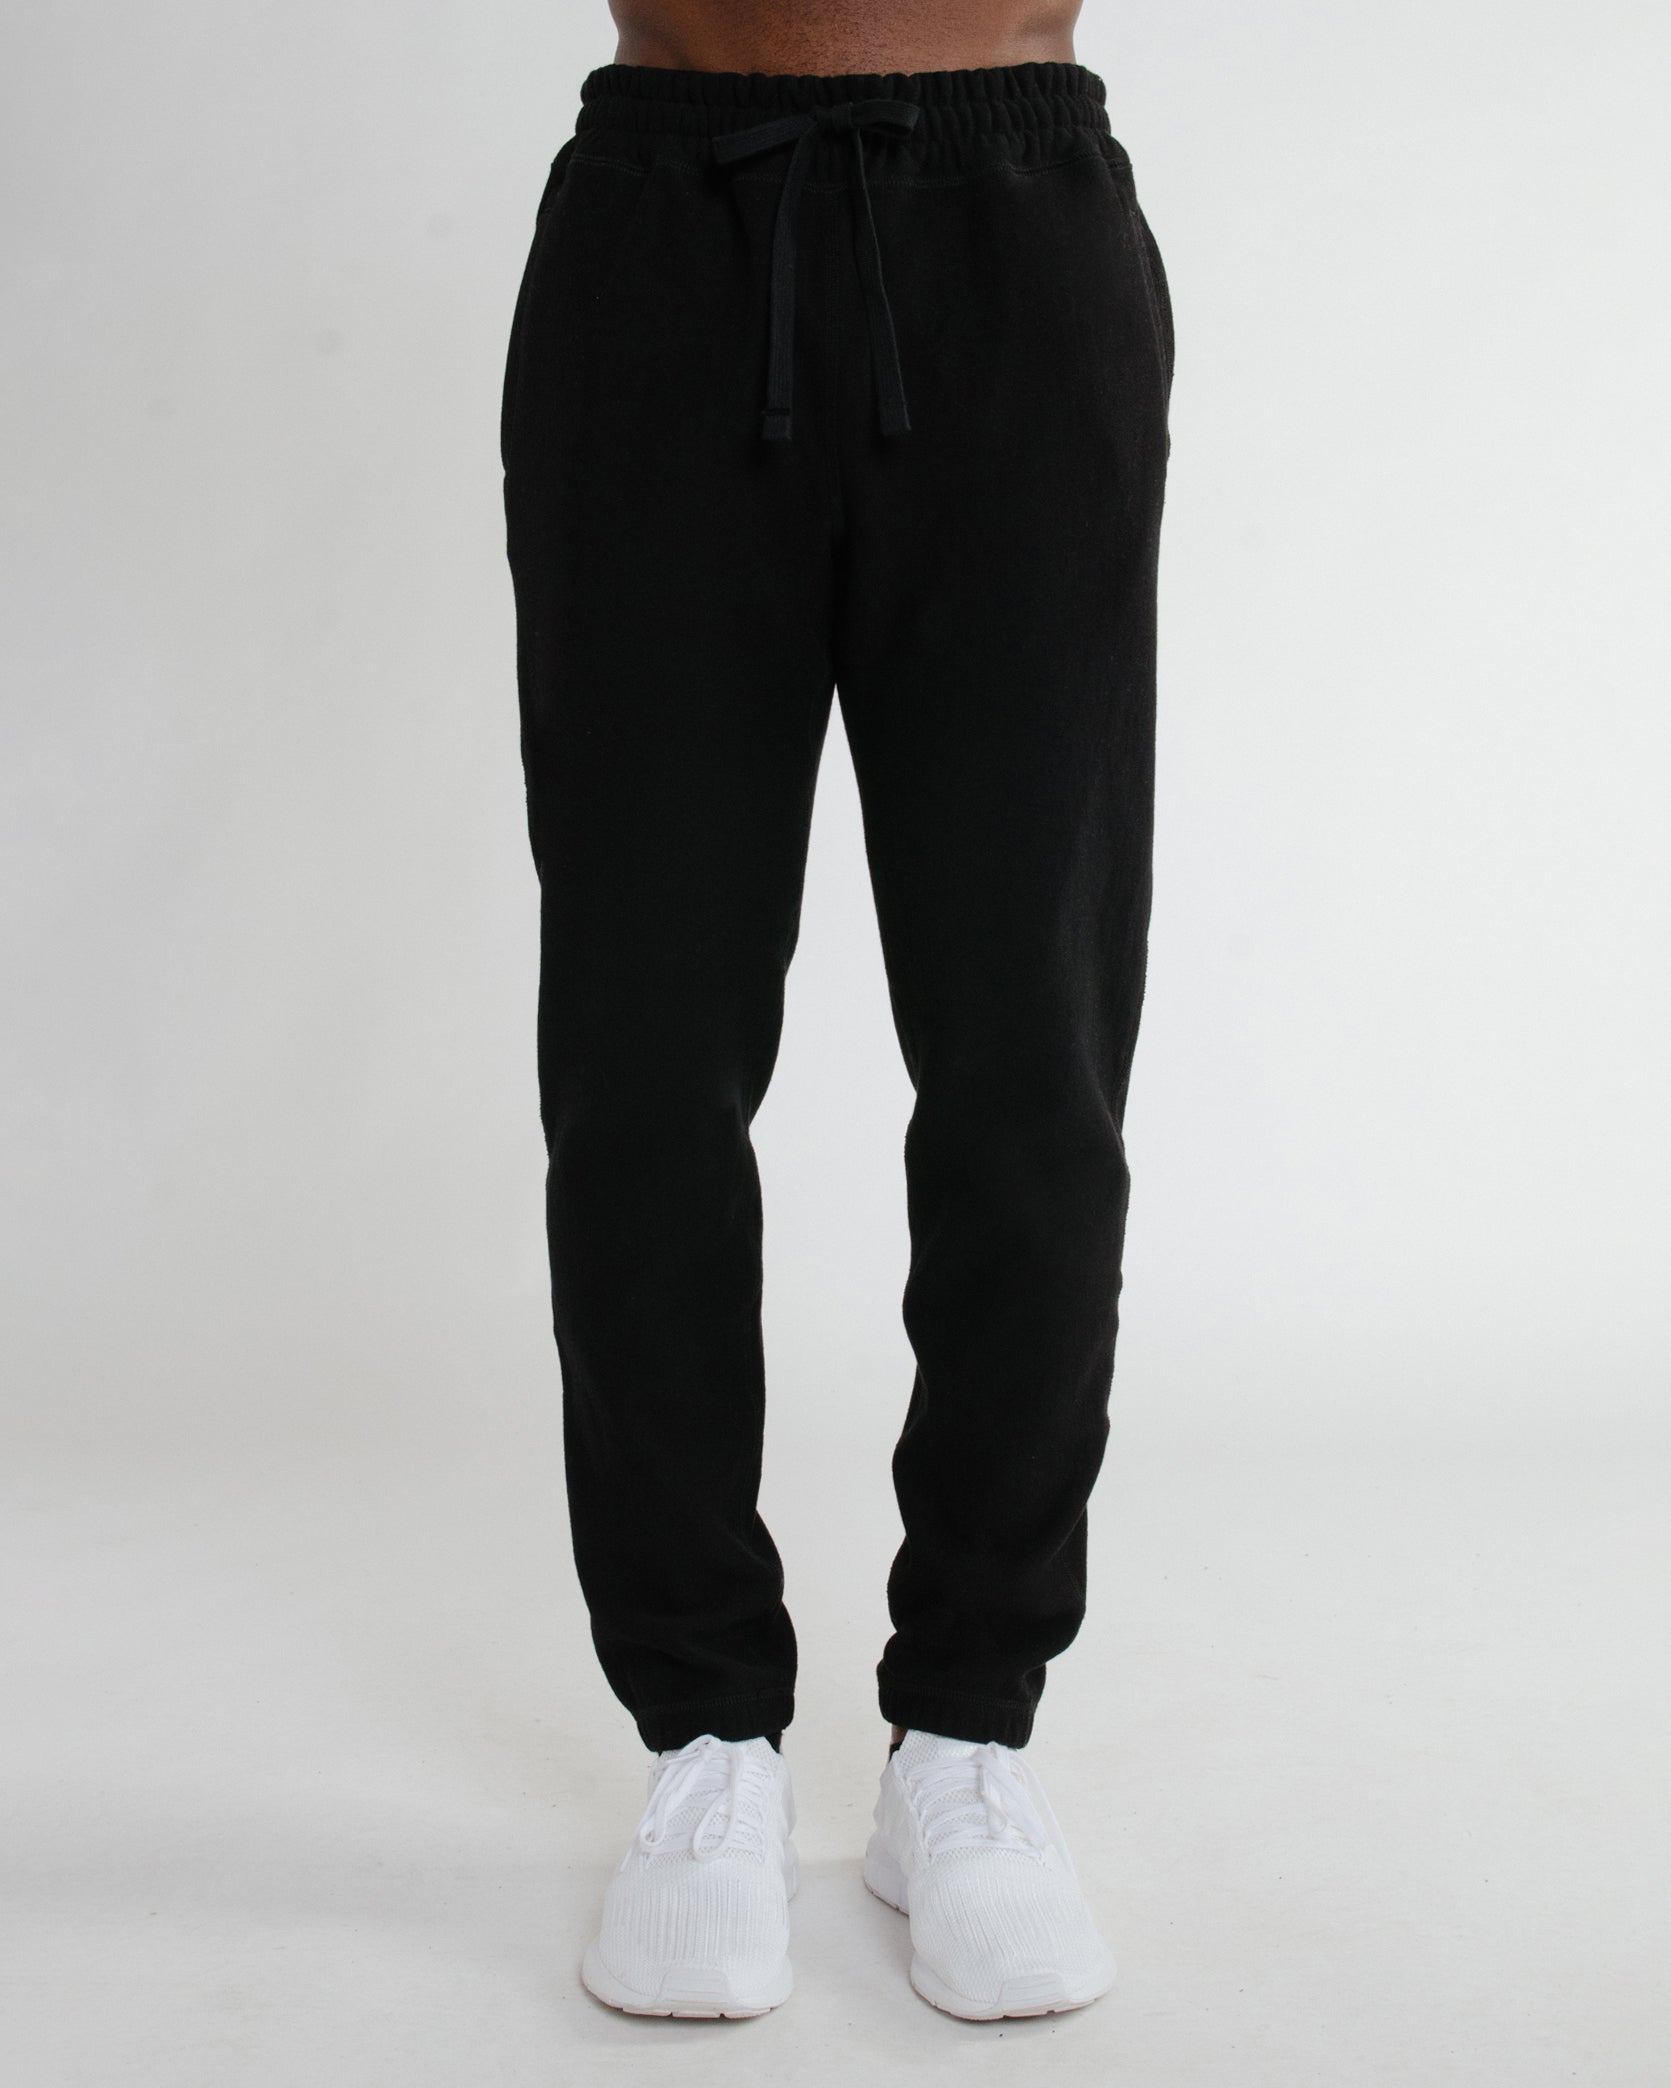 Mens Mackage black Upcycled Polyester Sweatpants